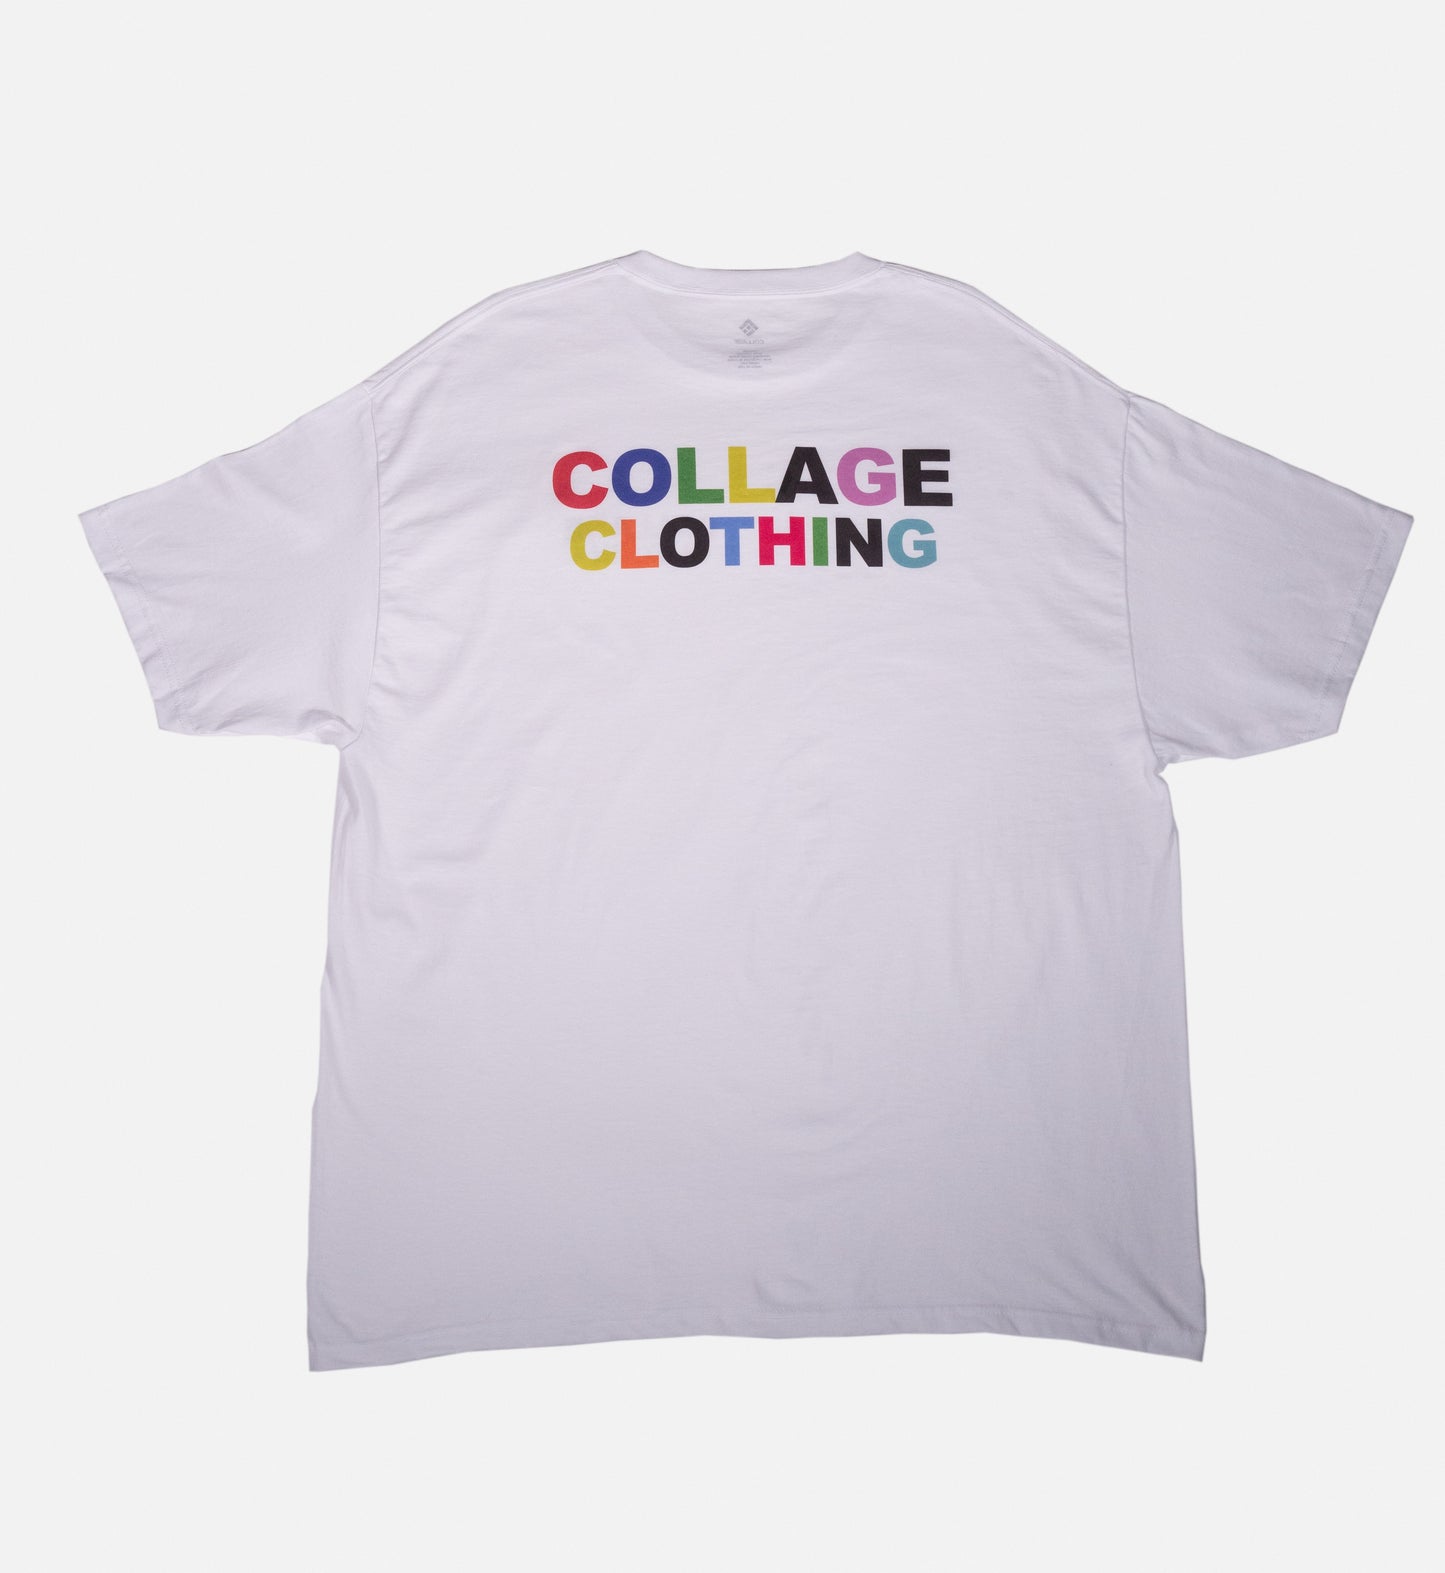 In Living Color Tee